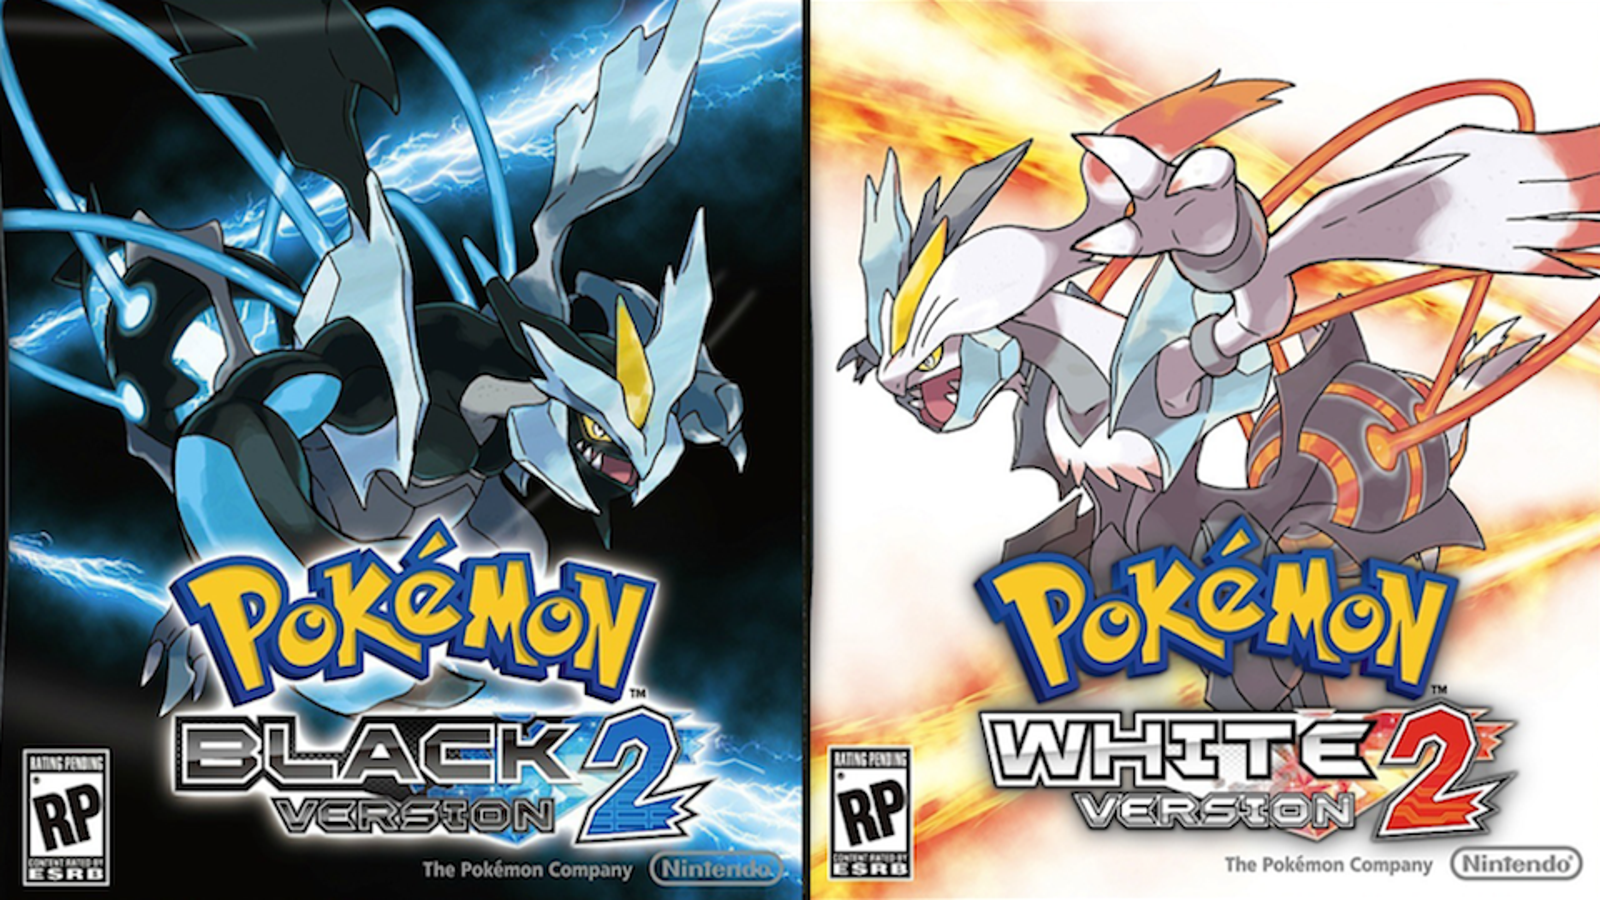 should i get pokemon black and white 1 or 2